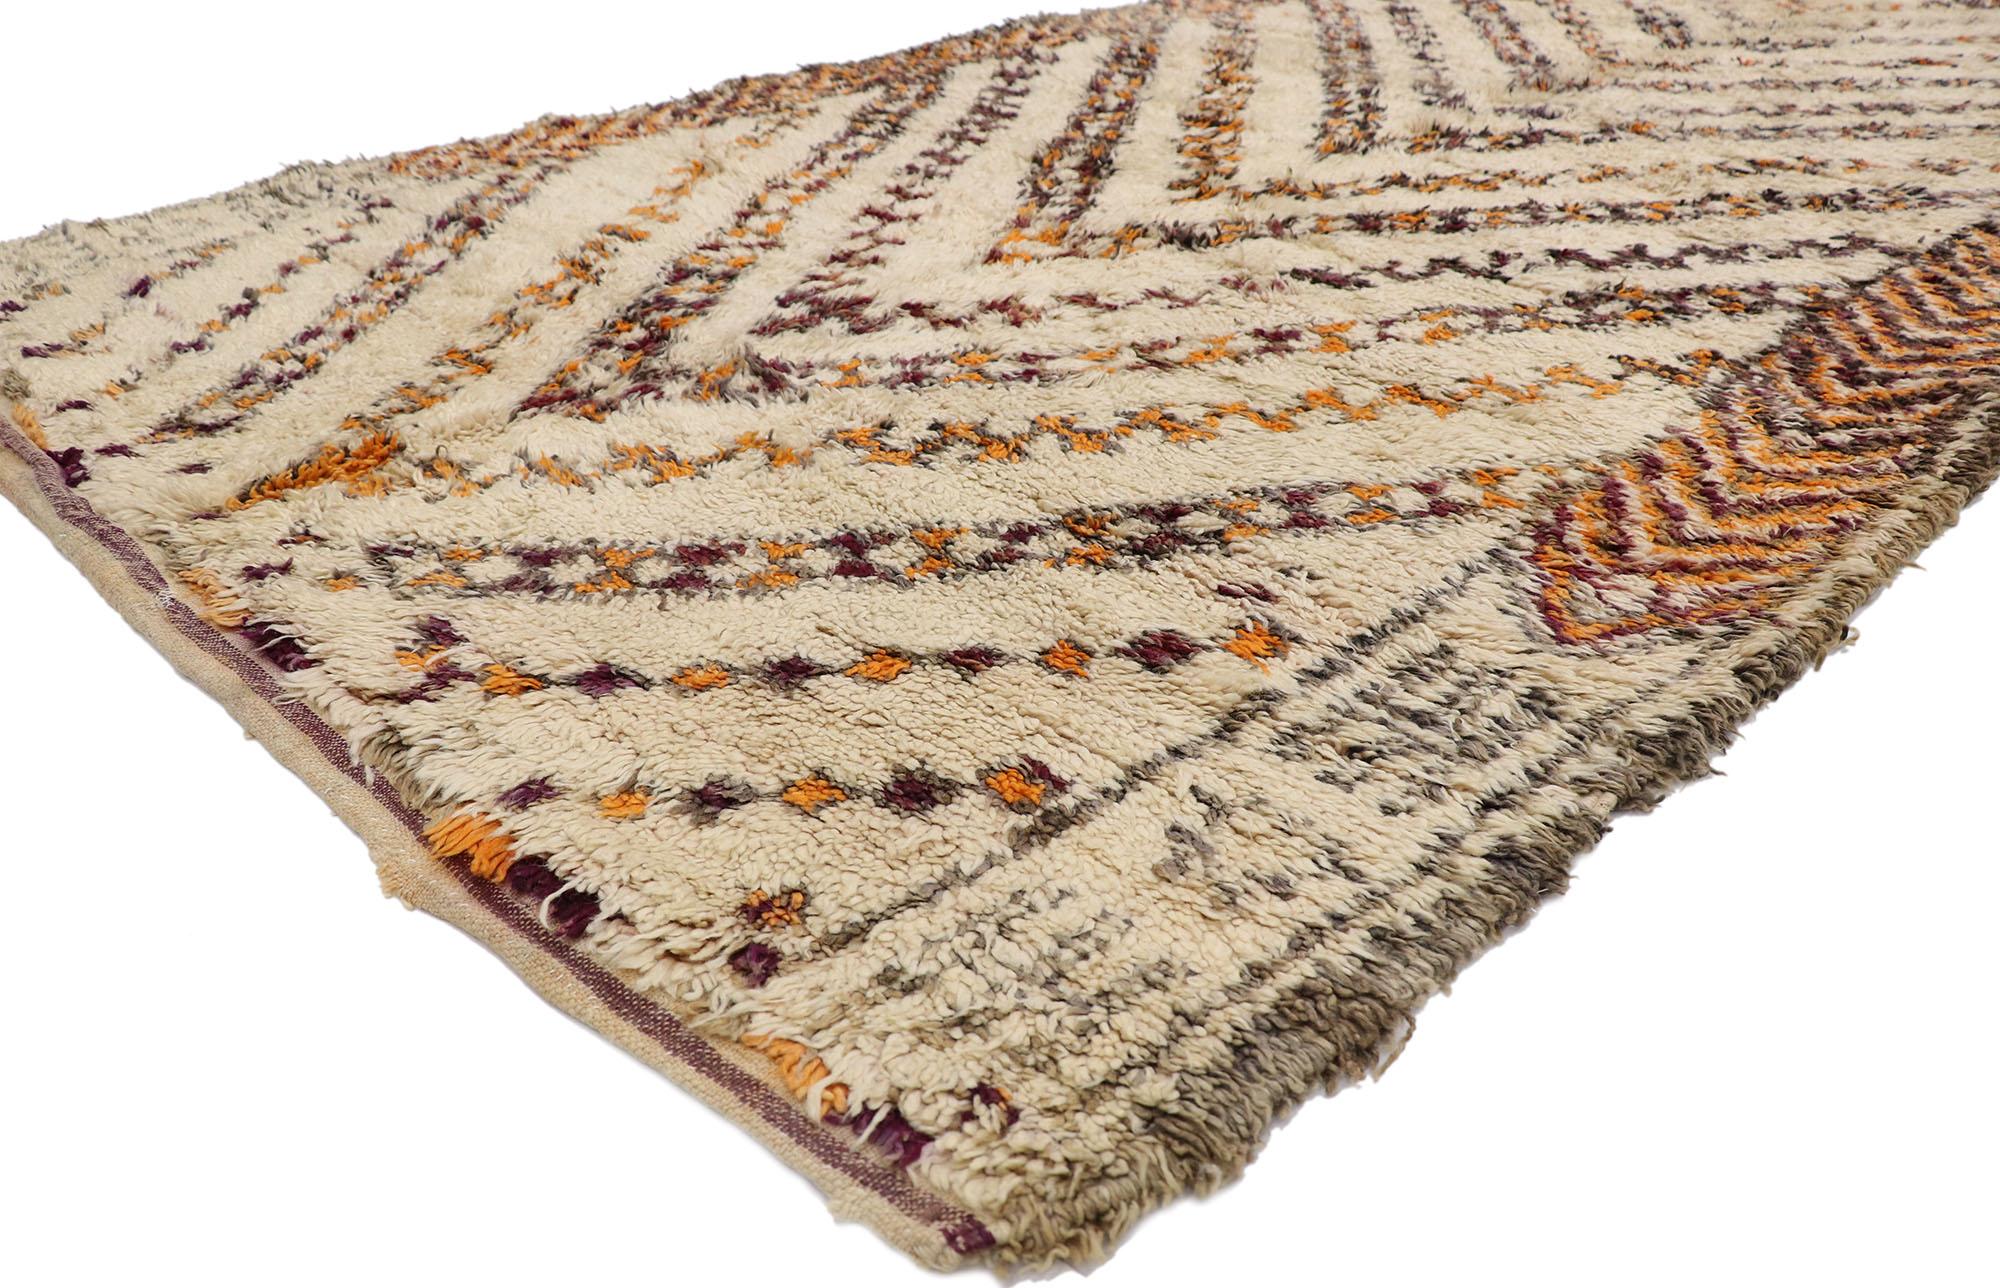 21369 Vintage Moroccan Beni Ourain Rug, 06'04 x 12'08.
With its simplicity, plush pile and Mid-Century Modern style, this hand knotted wool vintage Berber Beni Ourain Moroccan rug is a captivating vision of woven beauty. It features repeating